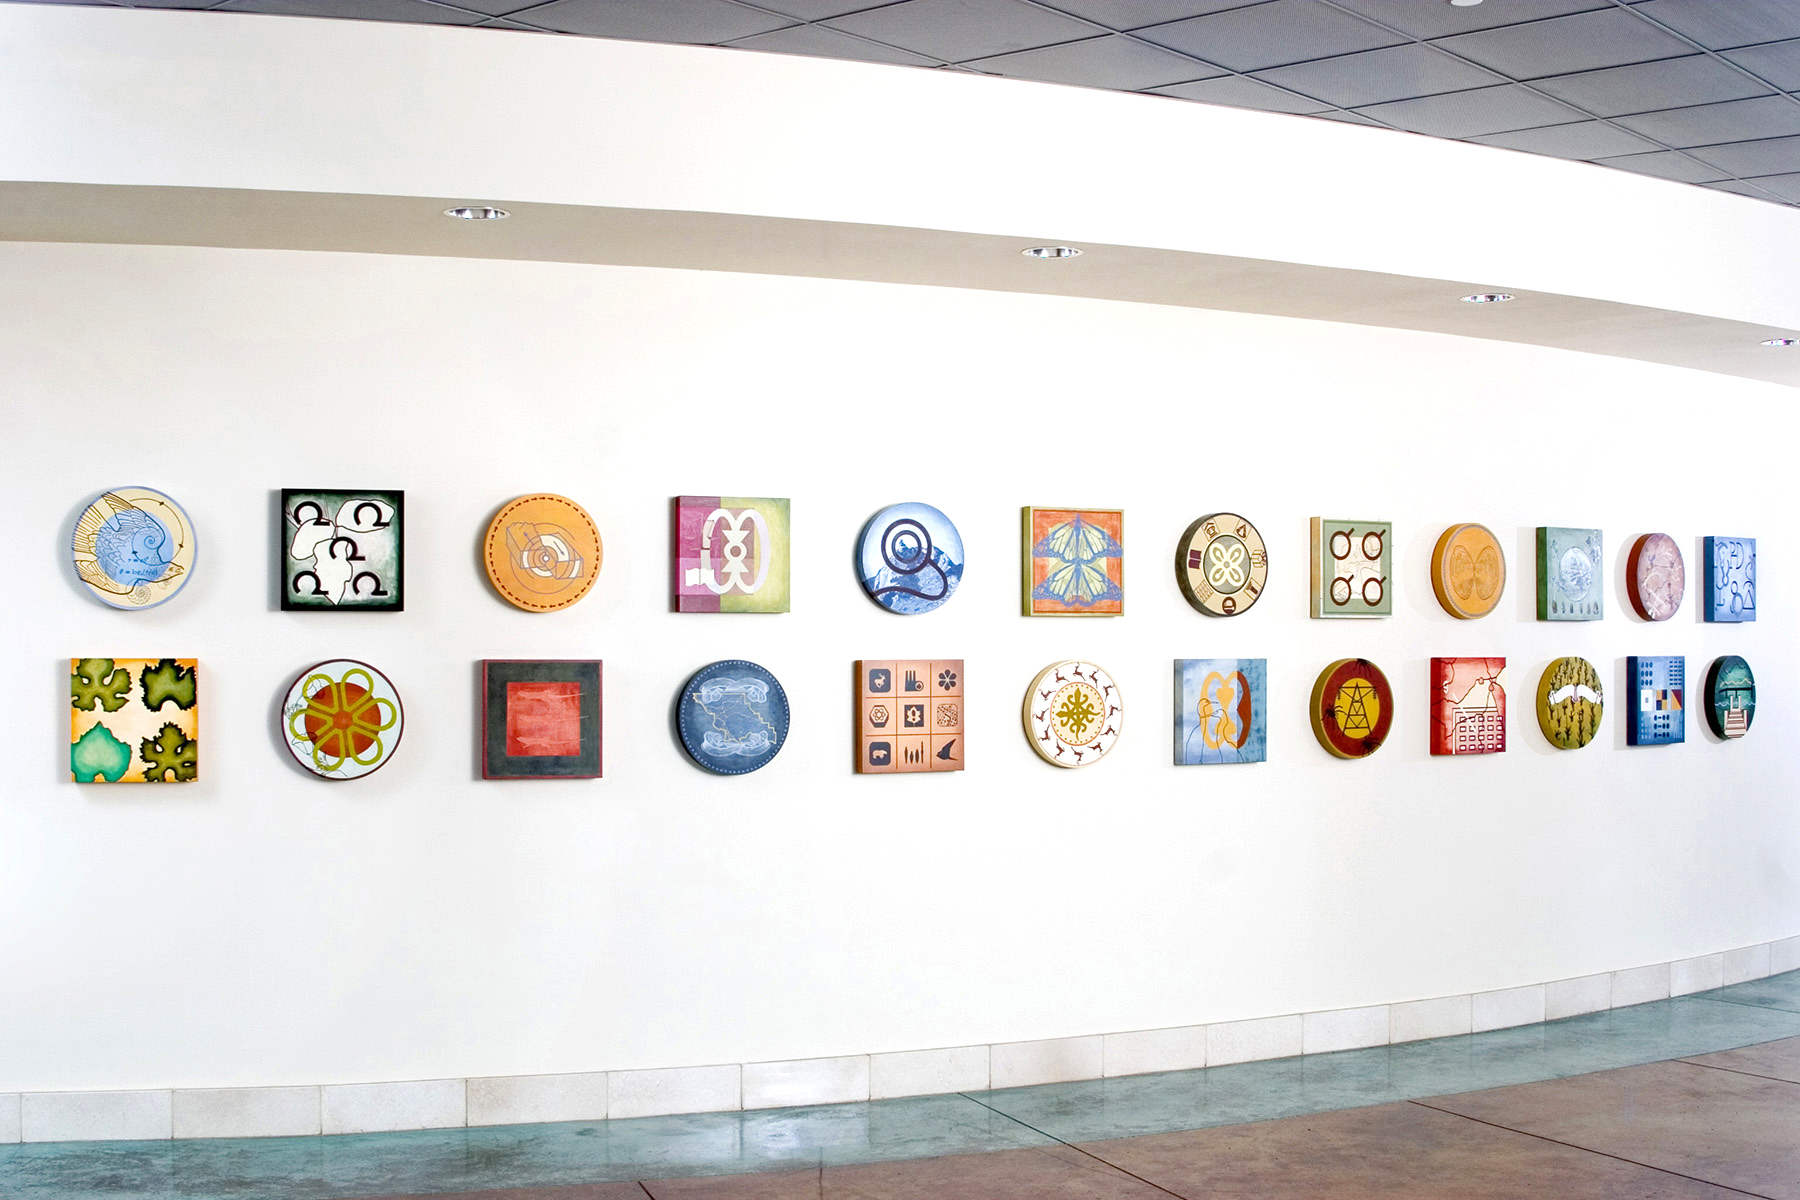    COUNTY   Oil and acrylic on wood panels, 36” x 290", 2007. This Installation was commissioned by San Luis Obispo County and is on permanent display at the SLO County Government Center. 